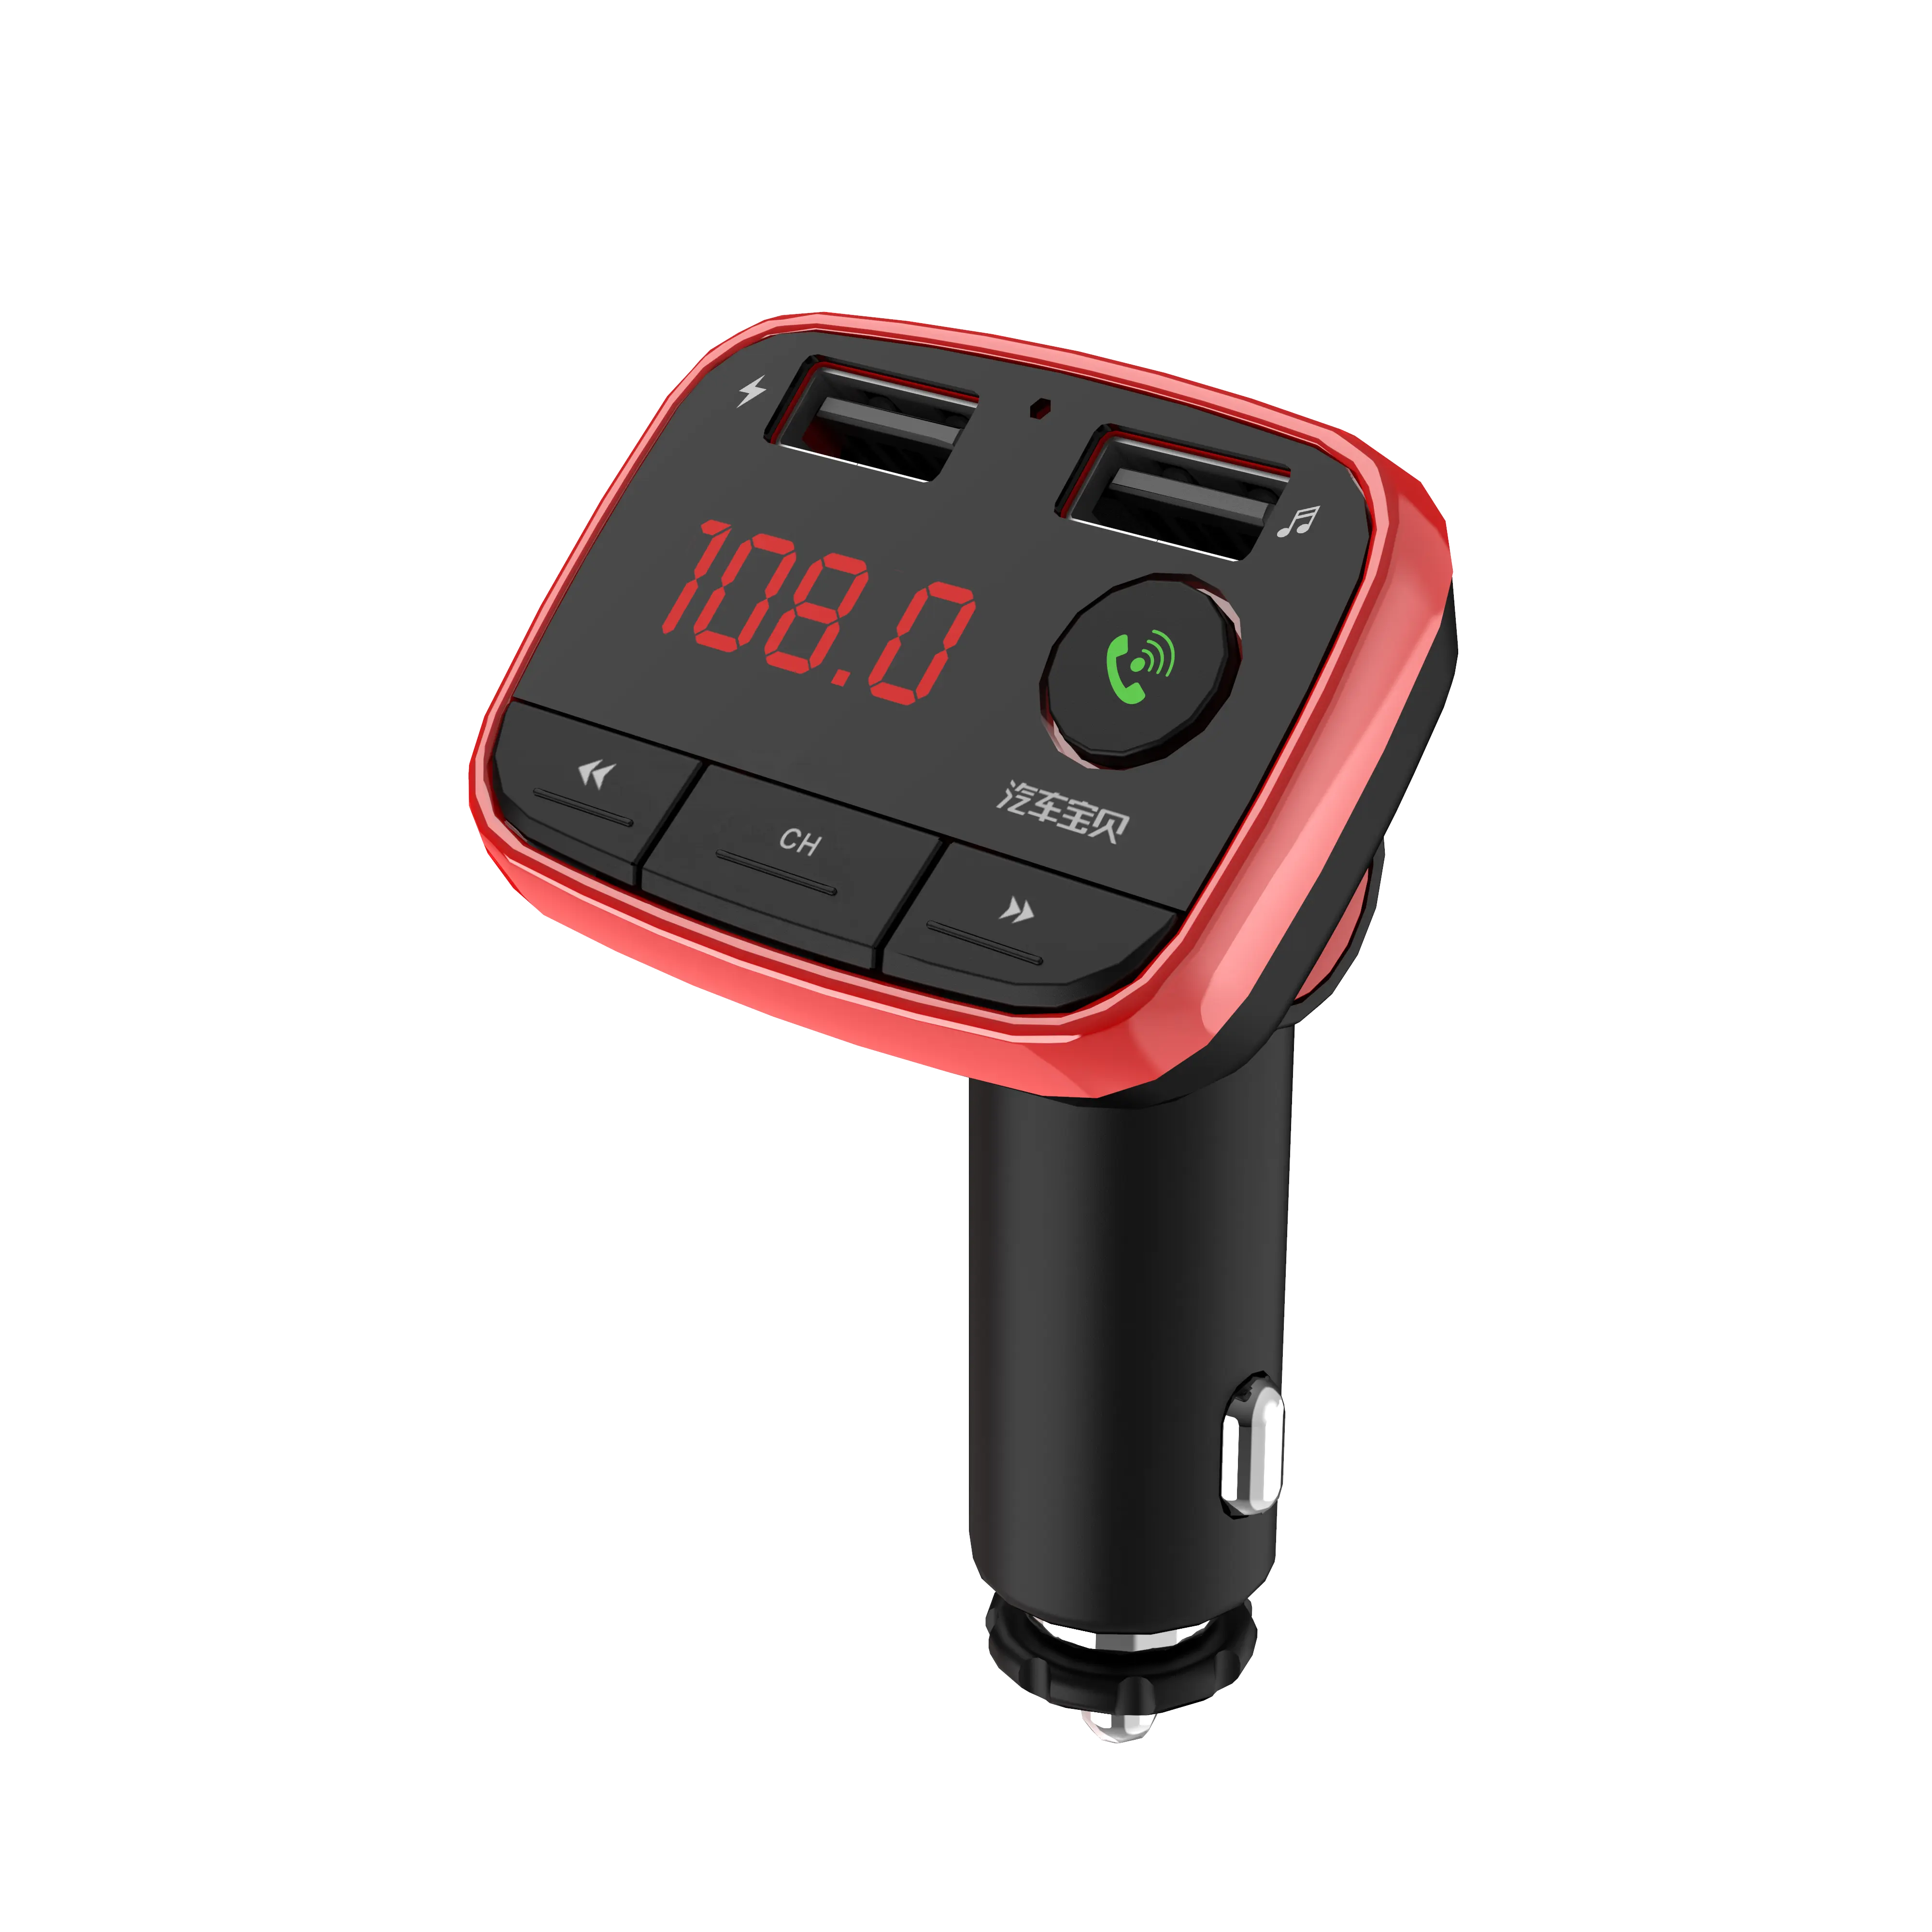 Universal Bluetooth Wireless Hands-free Receiver Car FM Transmitter 5.0 Vision Car Kit with USB Car Charger